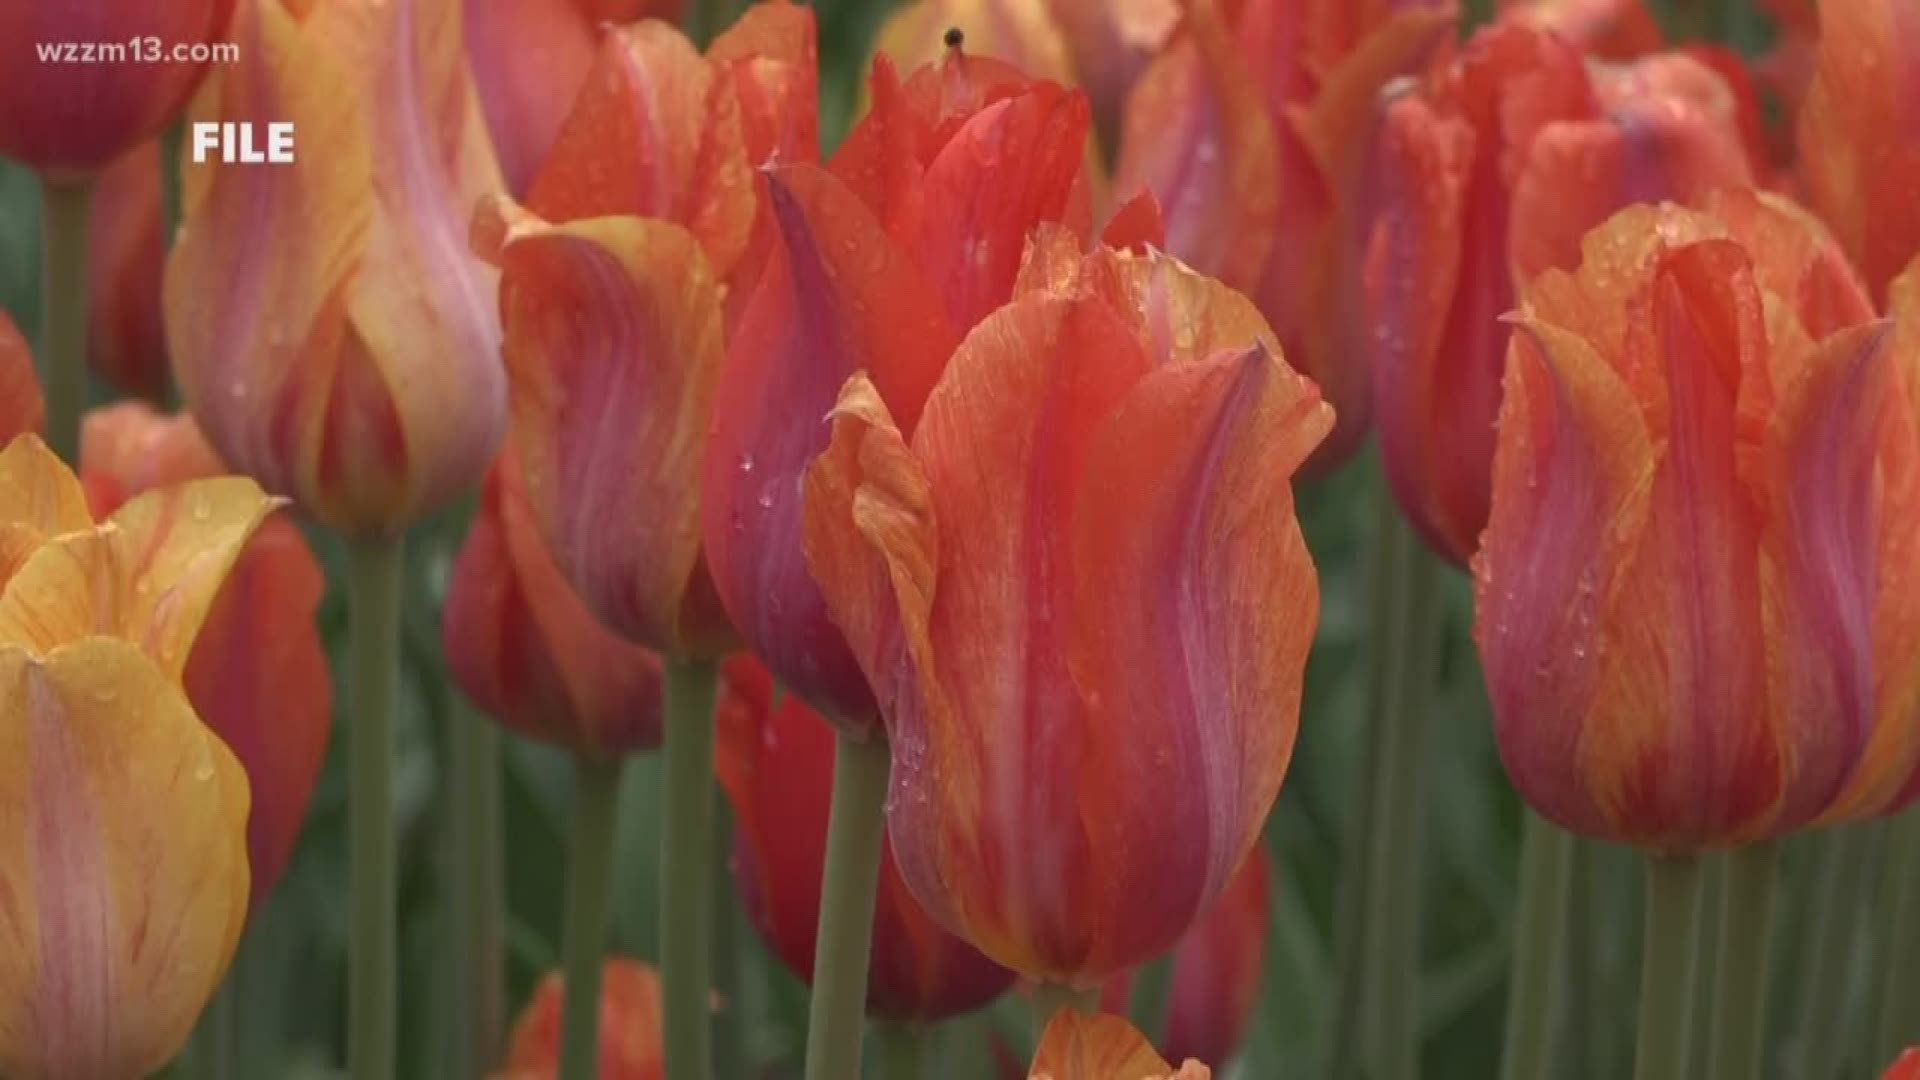 The 2019 Tulip Time Run ends among the tulips.